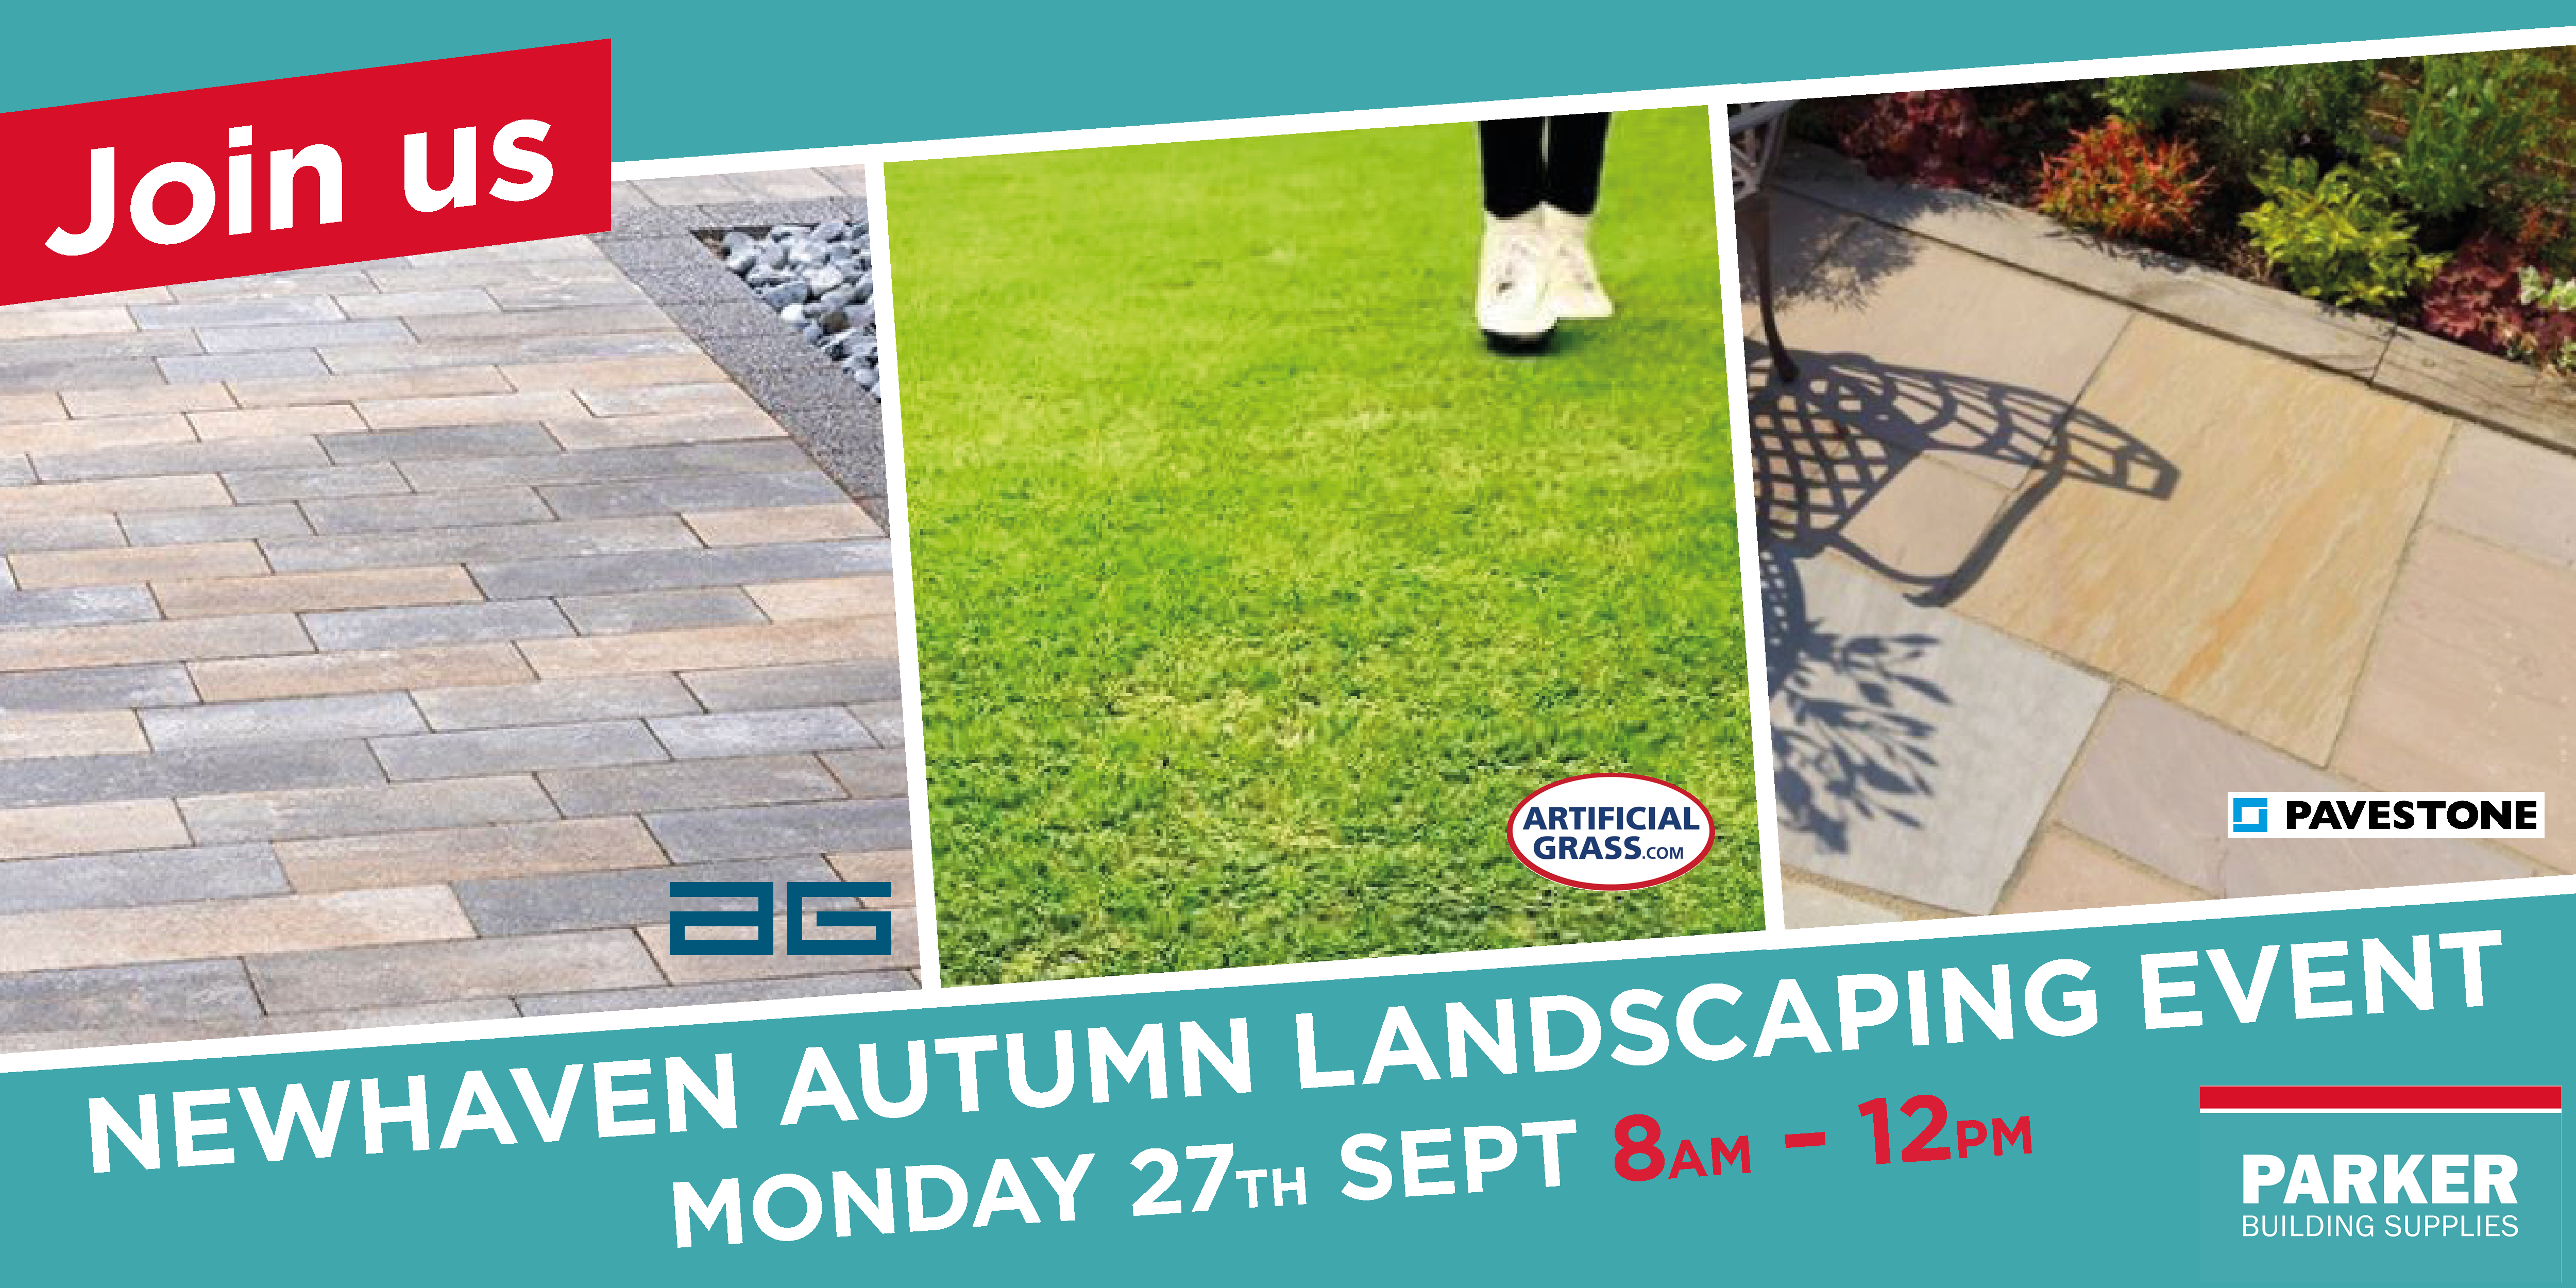 Newhaven Autumn Landscaping Trade Morning Announced